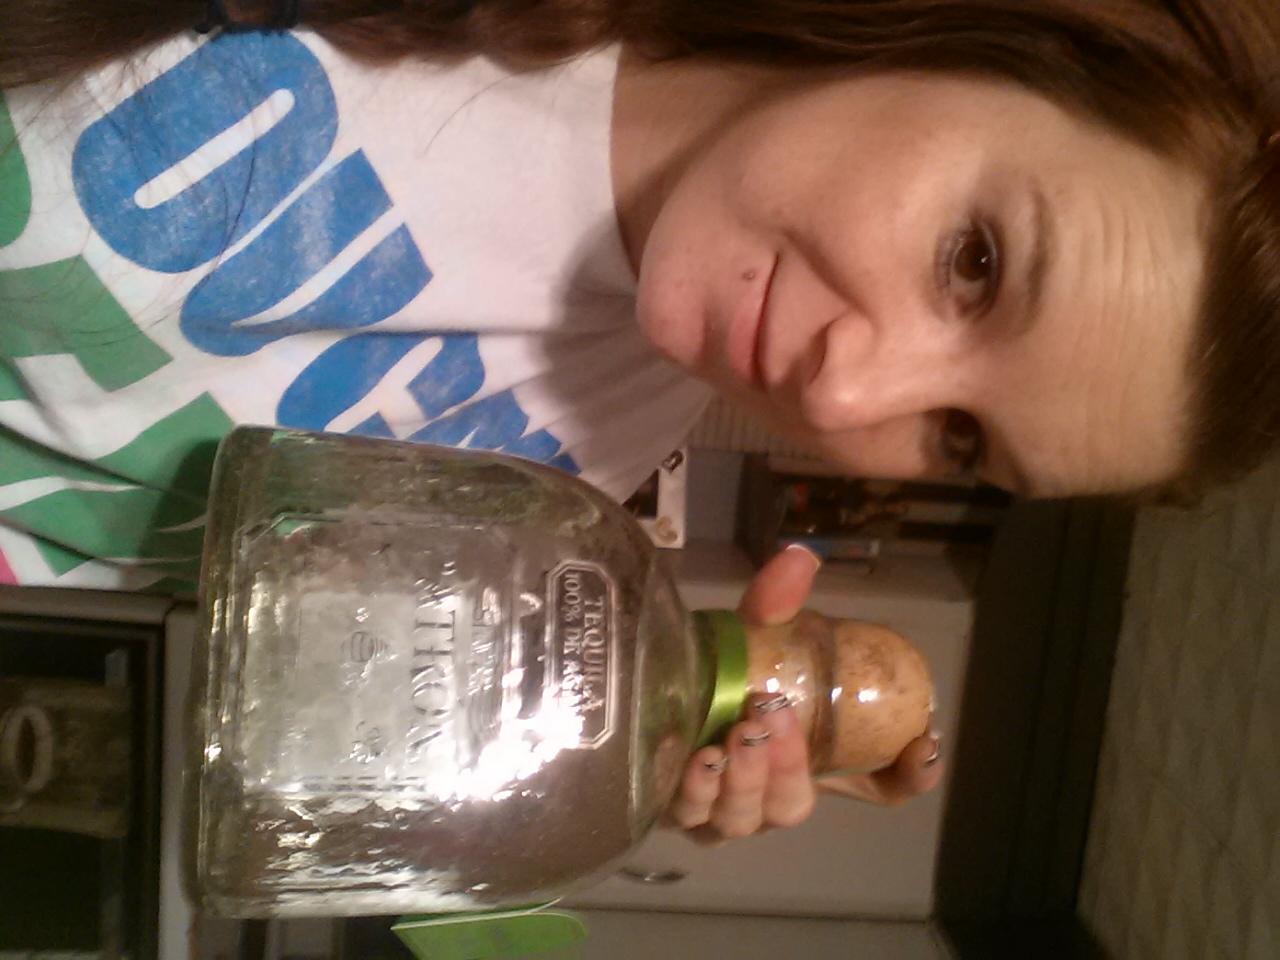 $108 bottle of Patron' bigger than my head. Wanna take some shots with me? (: